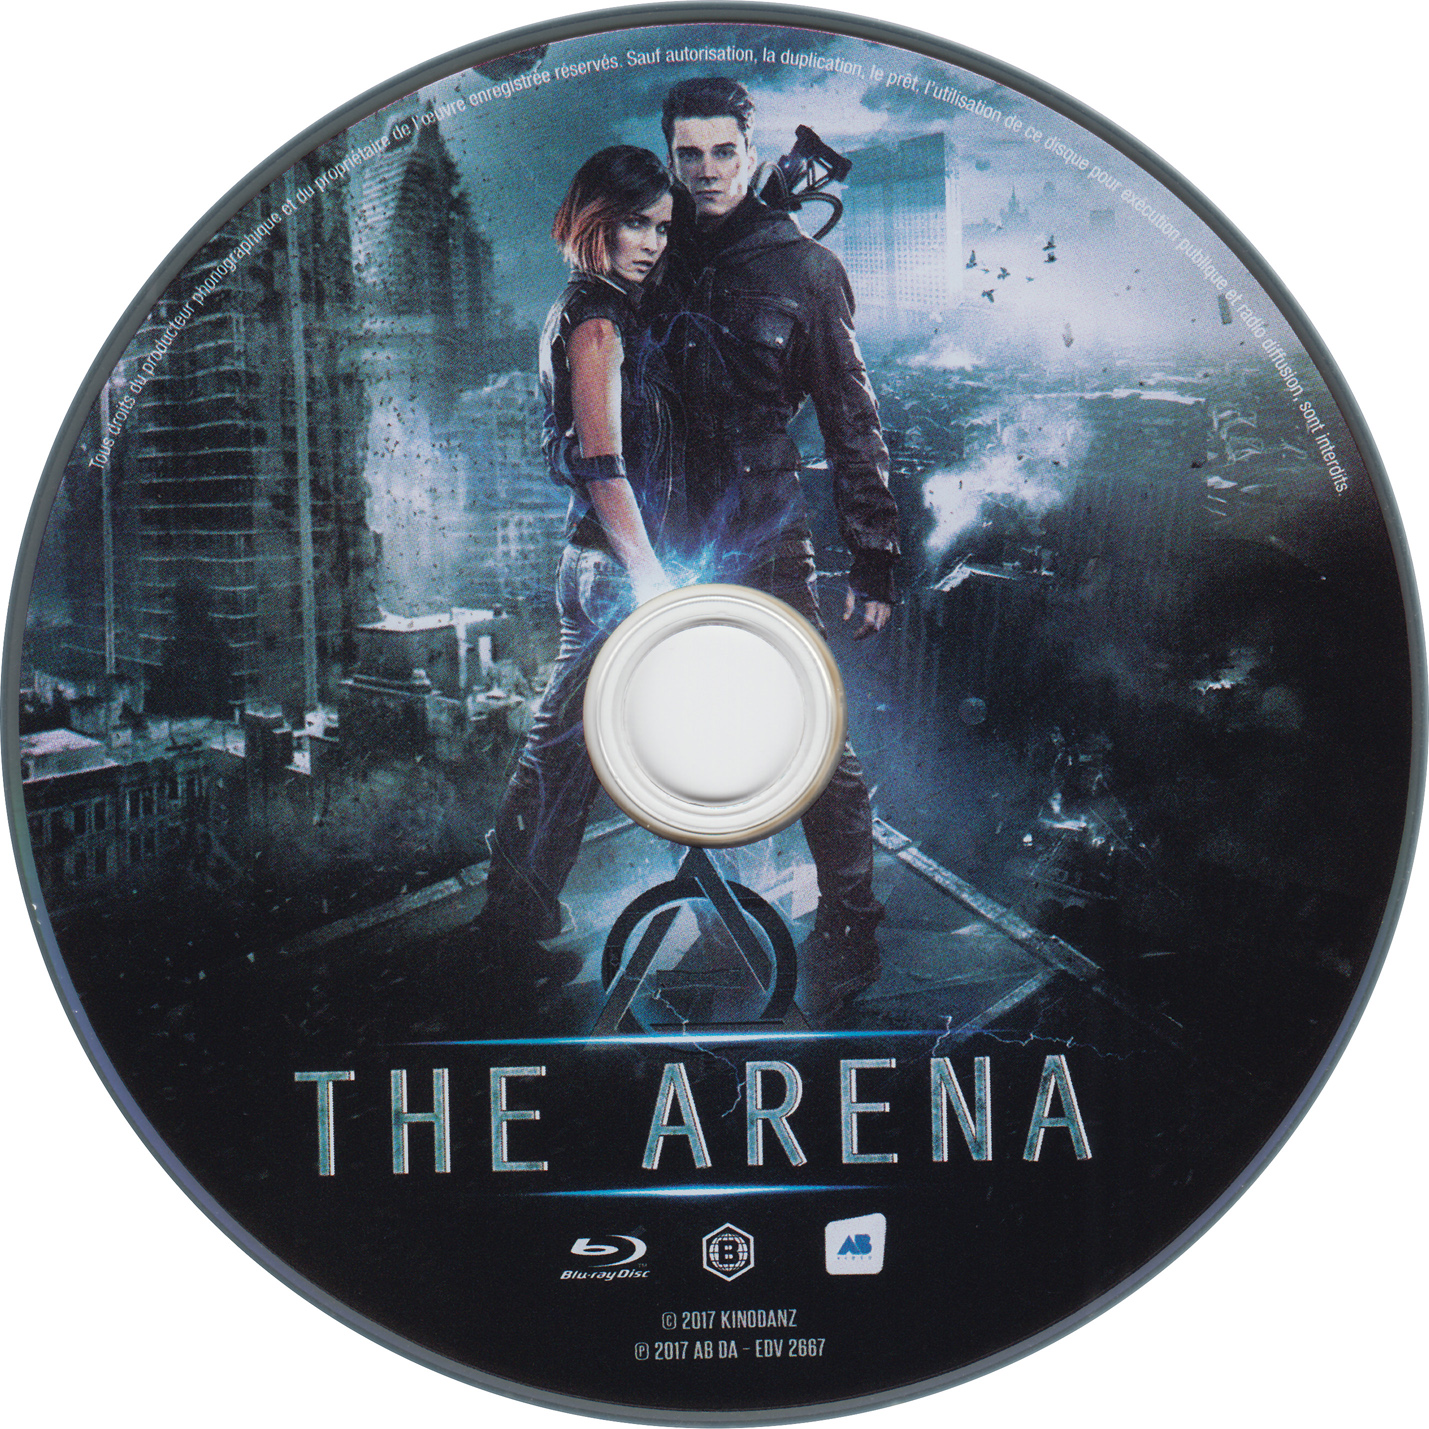 The arena (BLU-RAY)